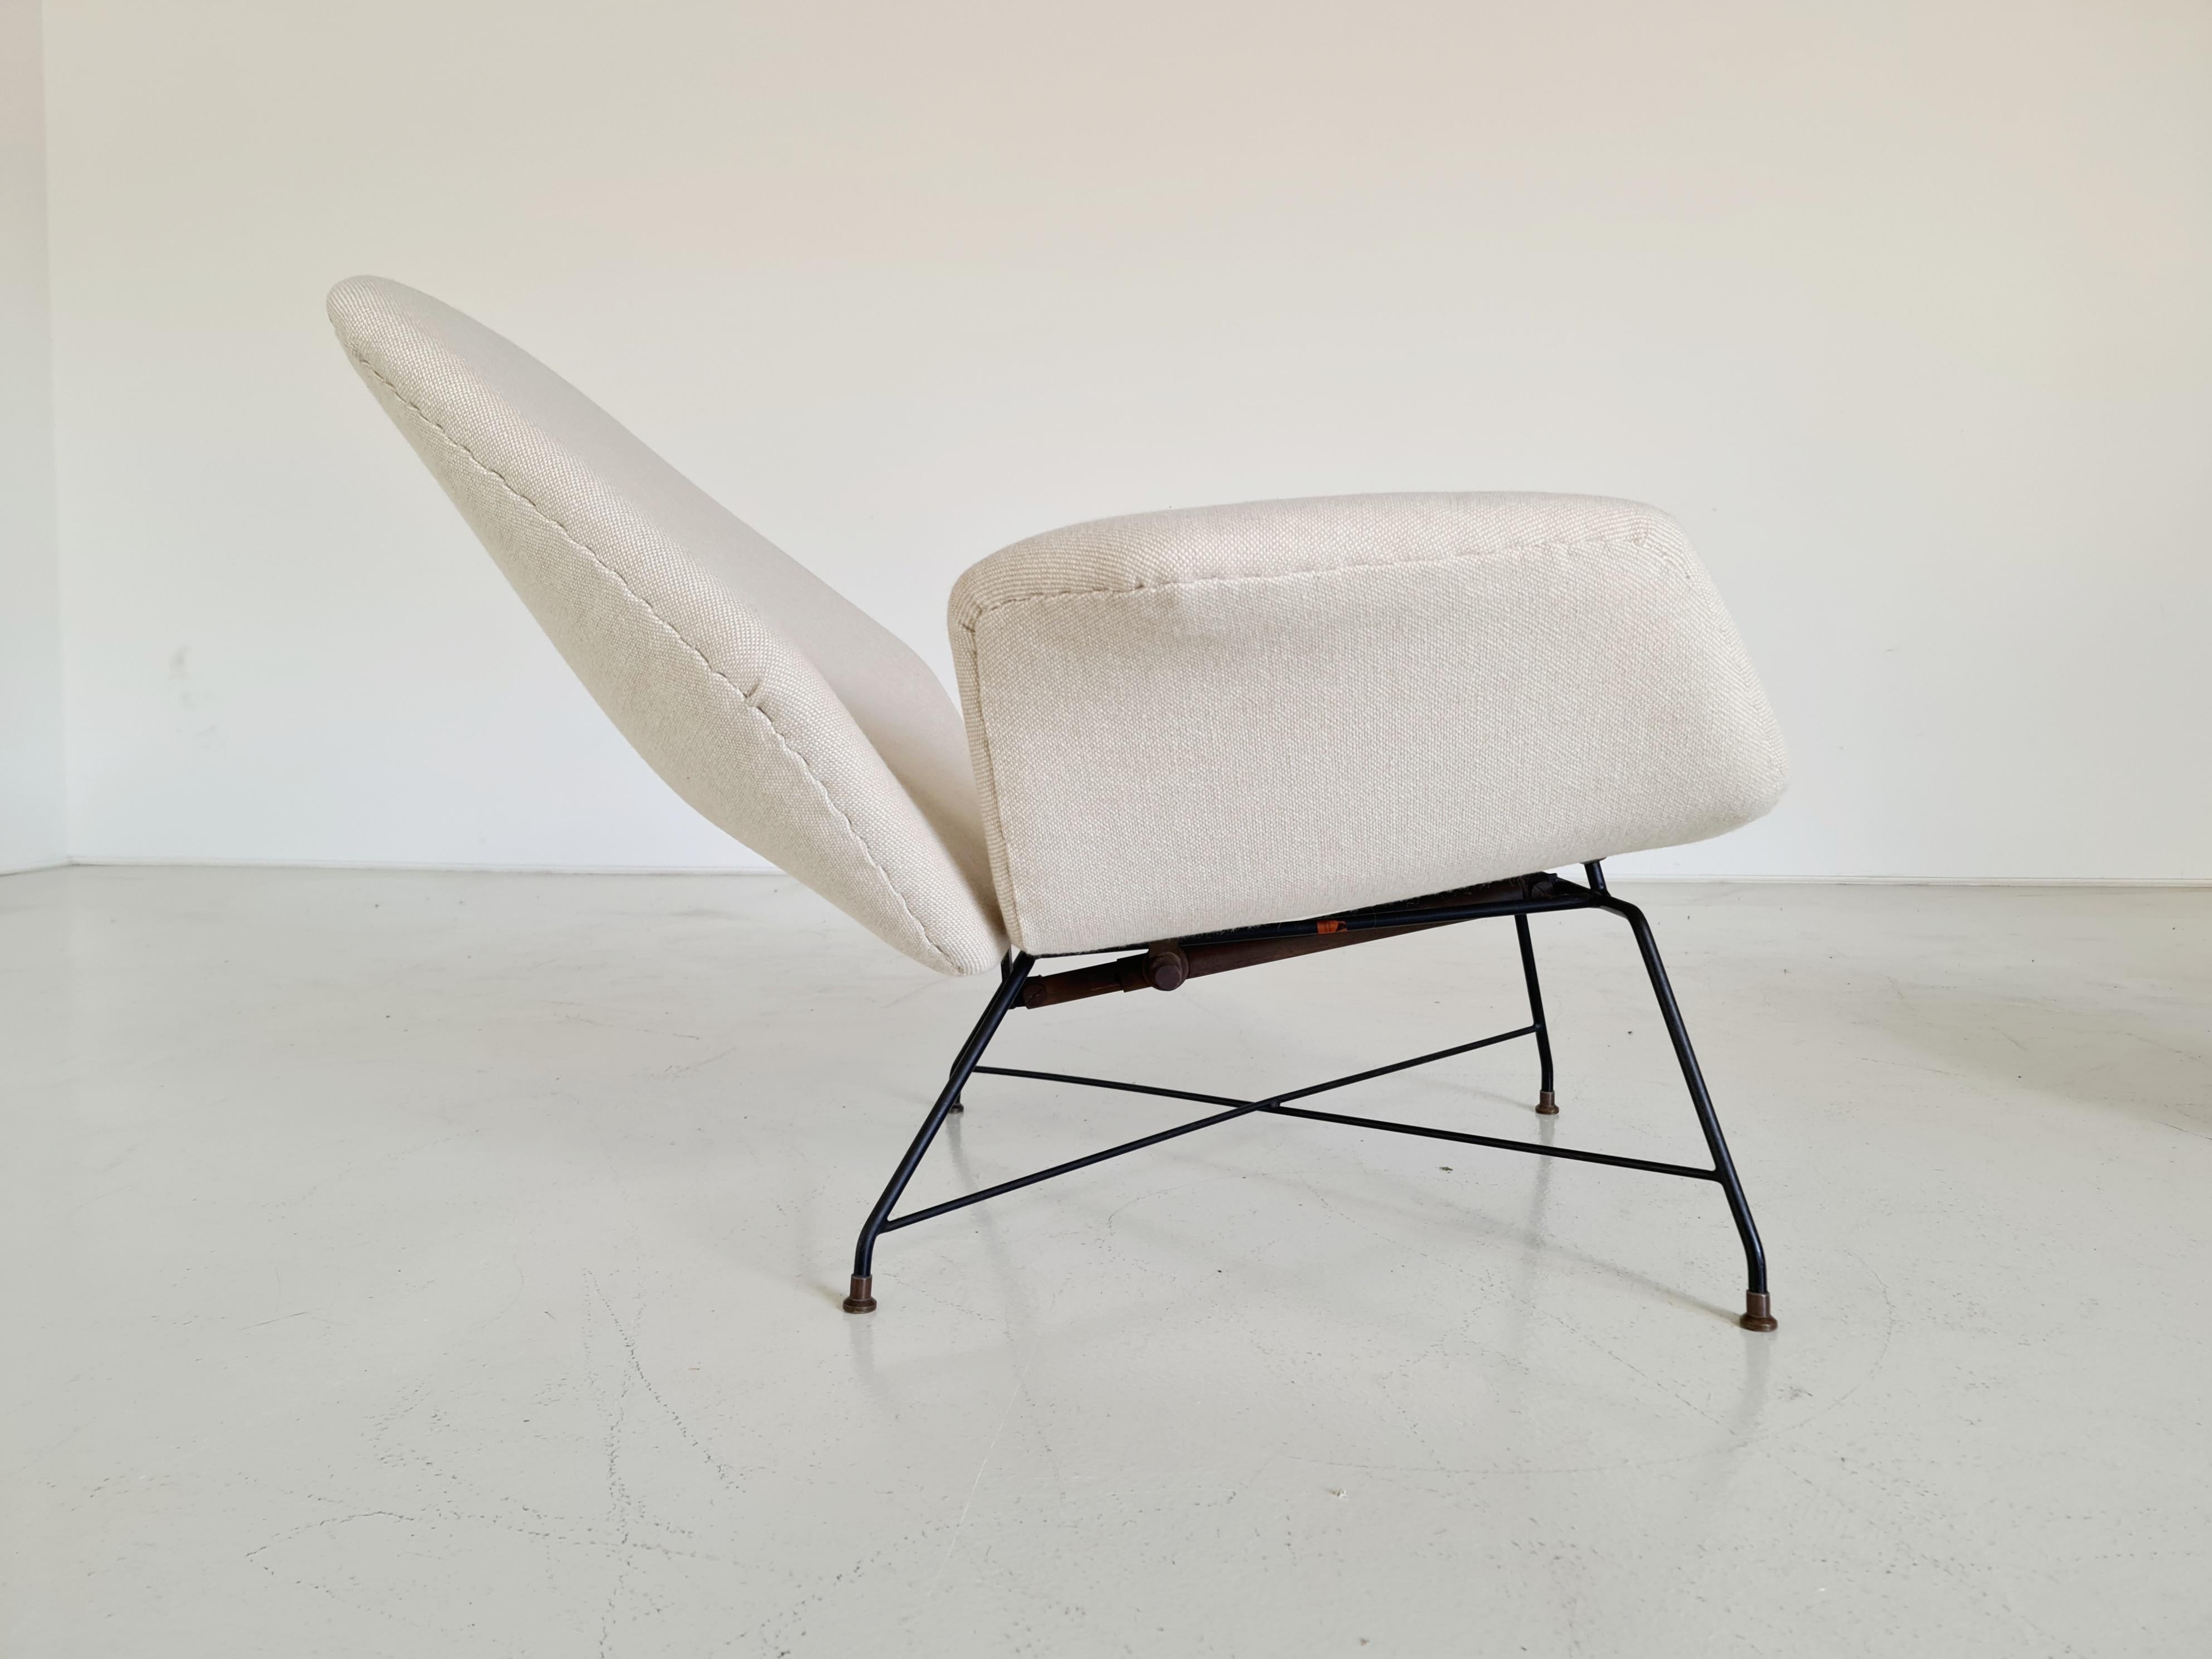 Mid-20th Century ‘Lotus’ Lounge Chairs in cream wool fabric by Augusto Bozzi for Saporiti, 1960s For Sale